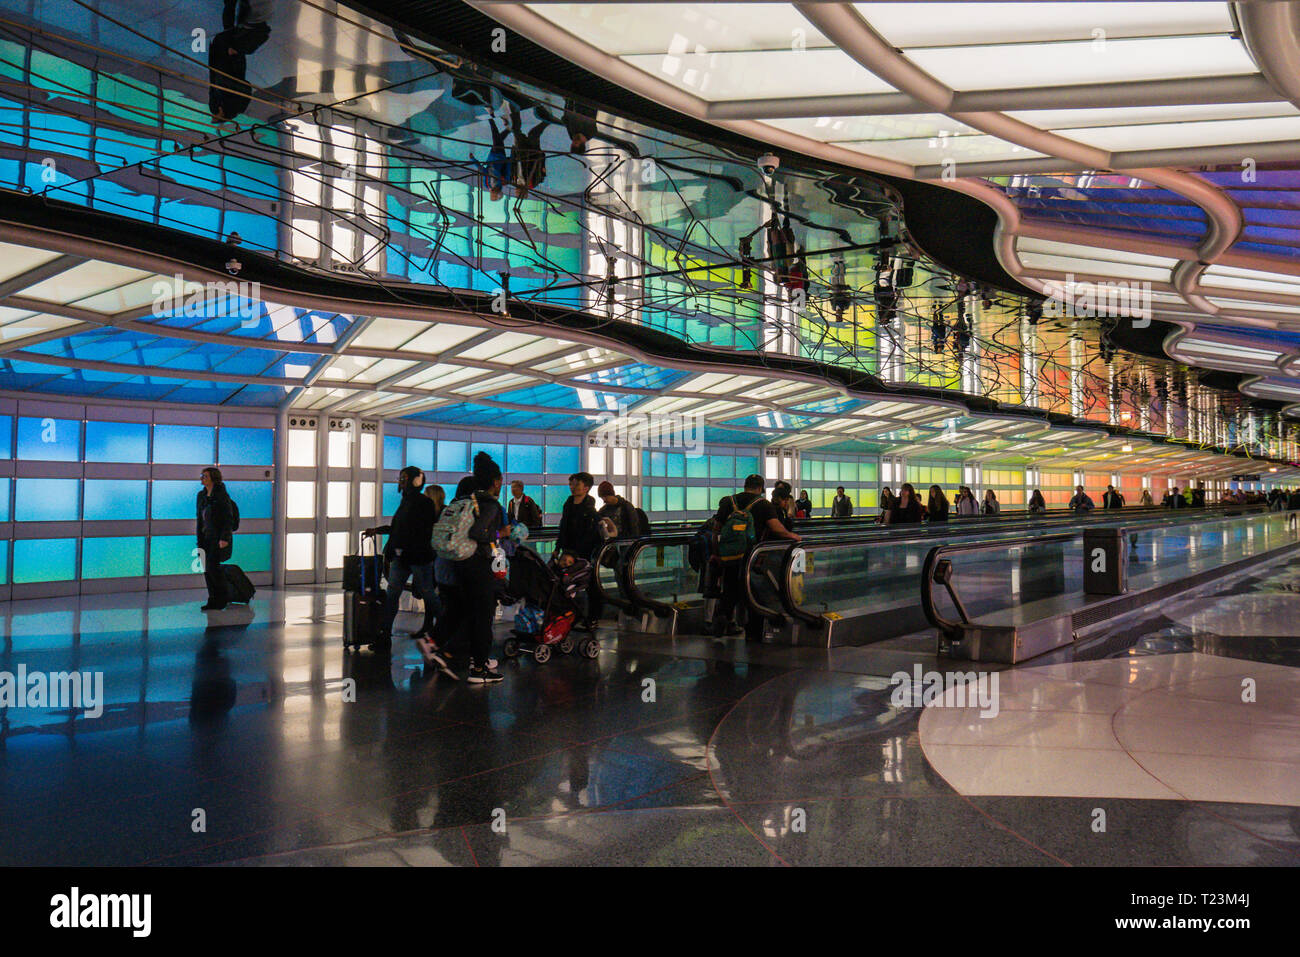 chicago ohare airport underground tunnel connecting concourses with neon lighting decoration by canadian artist micael hayden Stock Photo